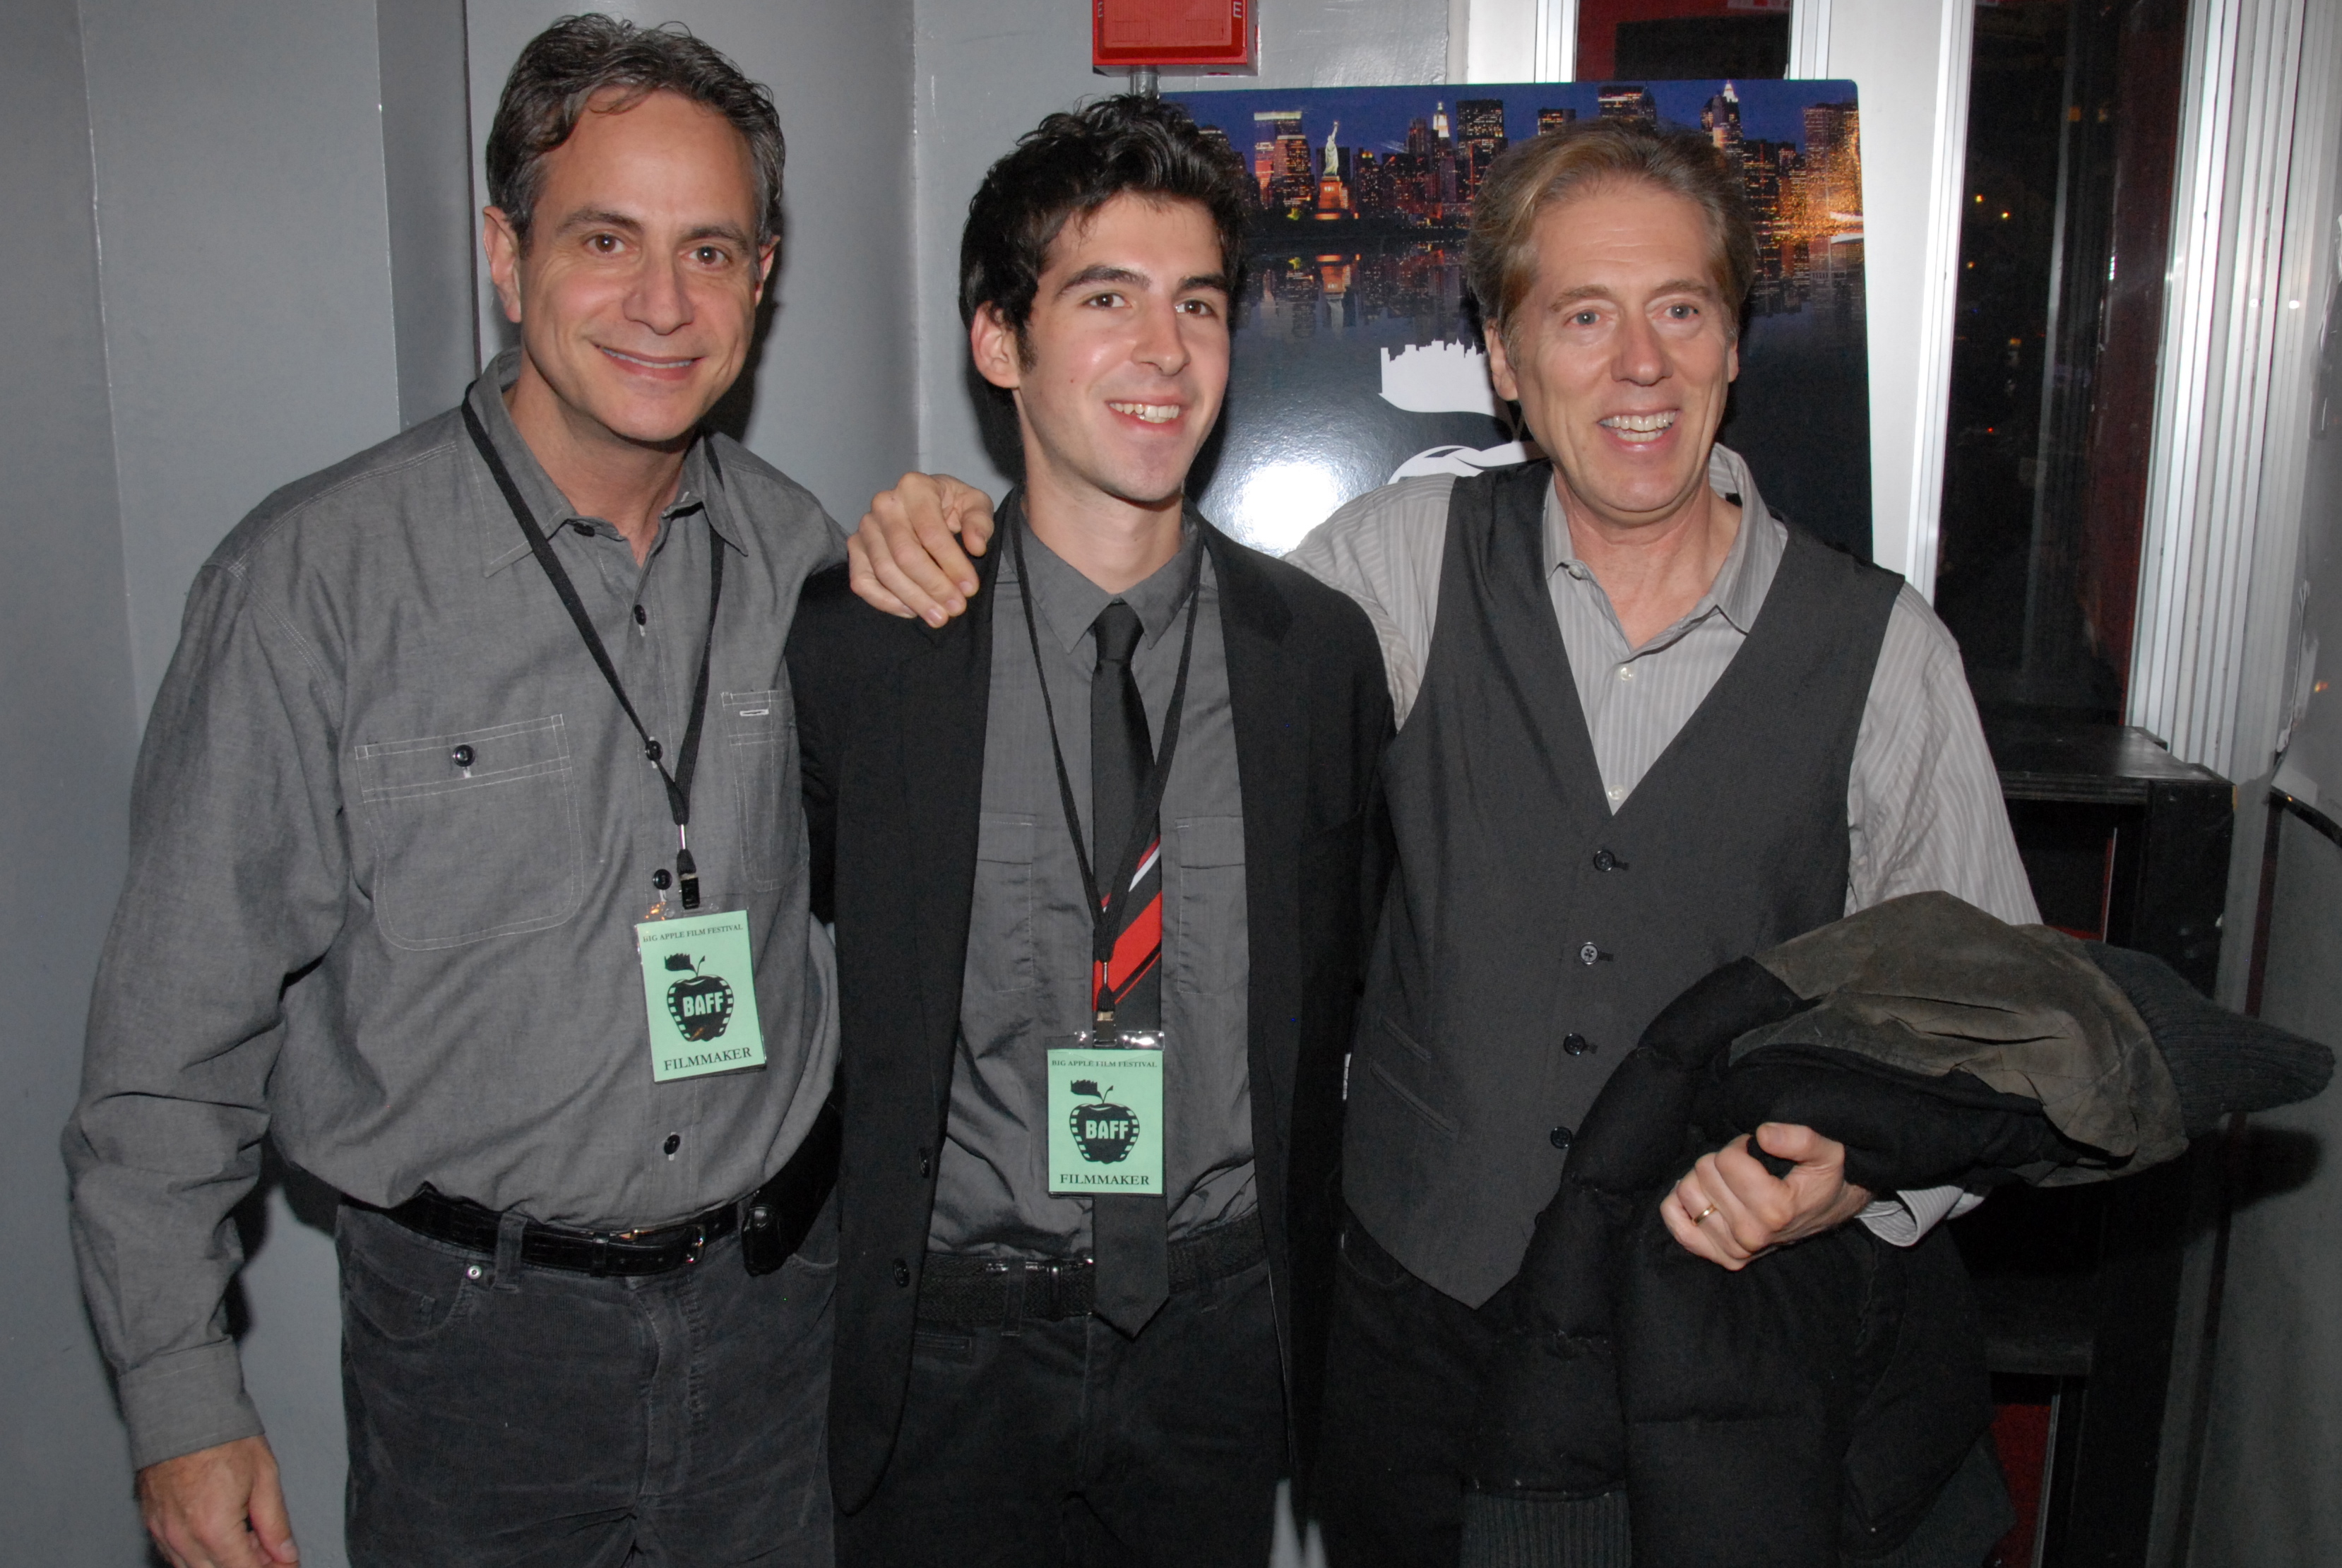 Big Apple Film Festival 2013 with Paul & The Enemy director/writer Jeremy Schaftel and co-star Allen Enlow